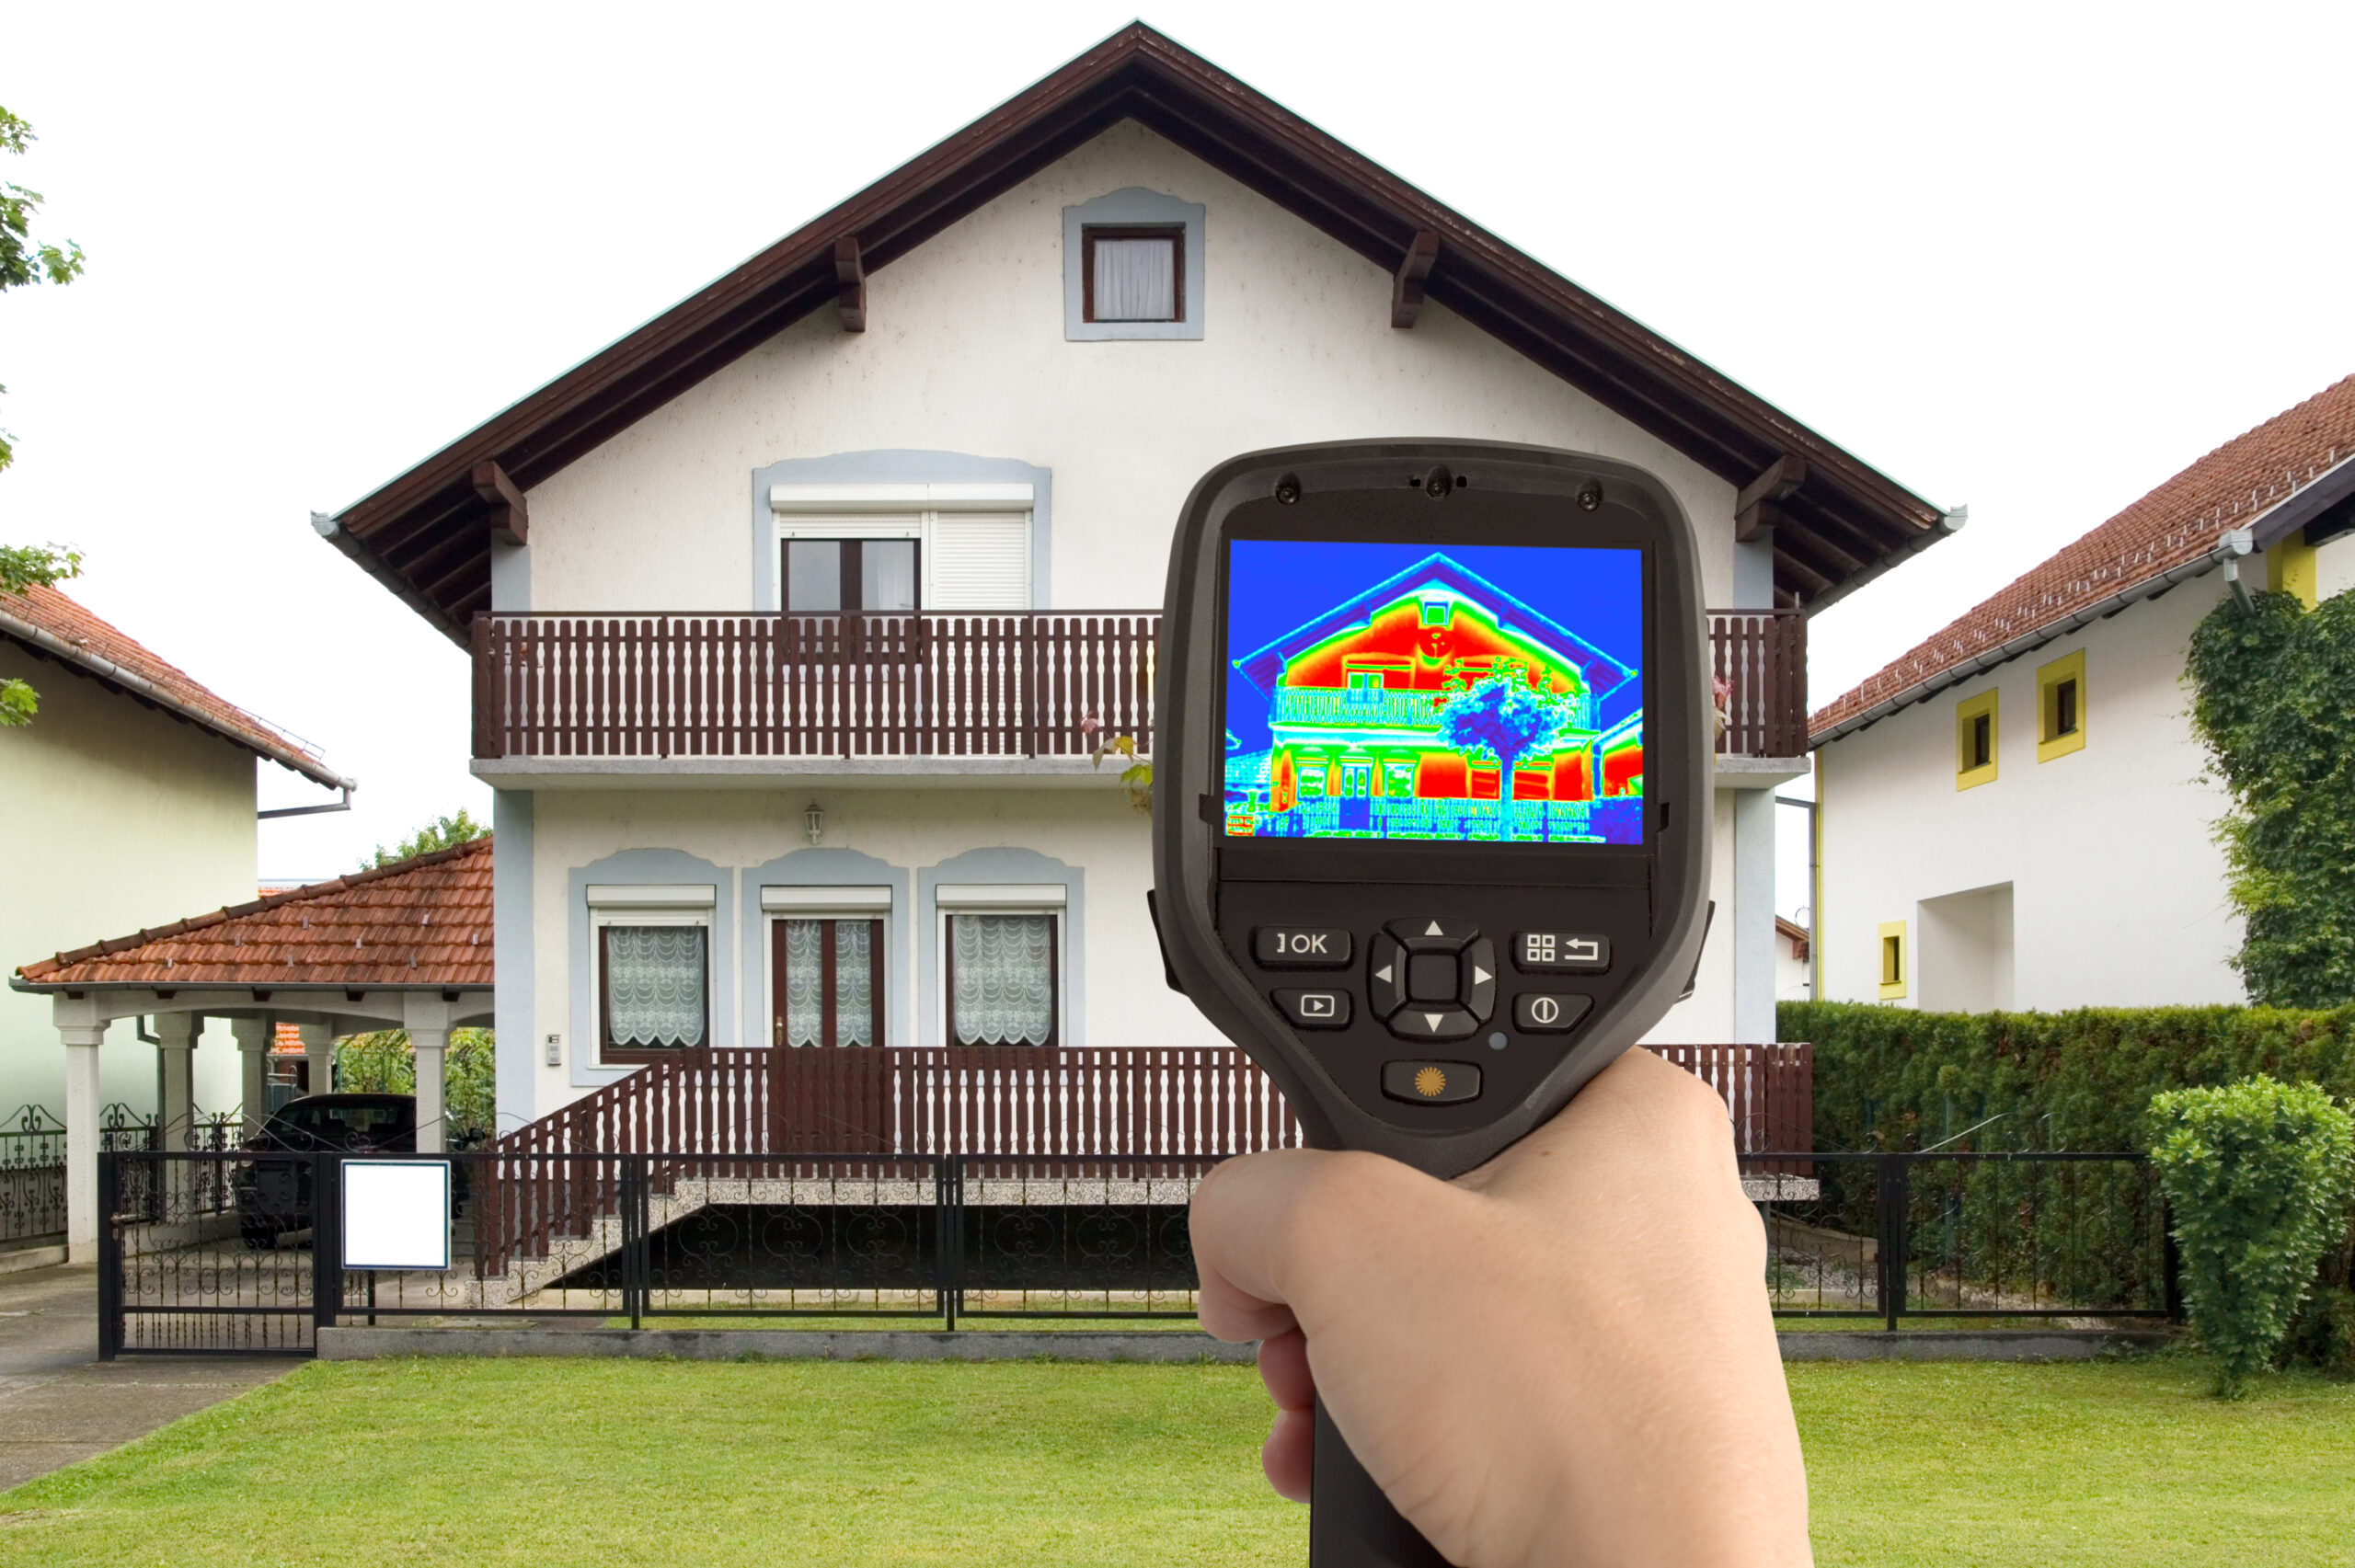 Exterior view of two-story home and lawn; hand holding infrared imaging gun in foreground shows heatmap of front facade